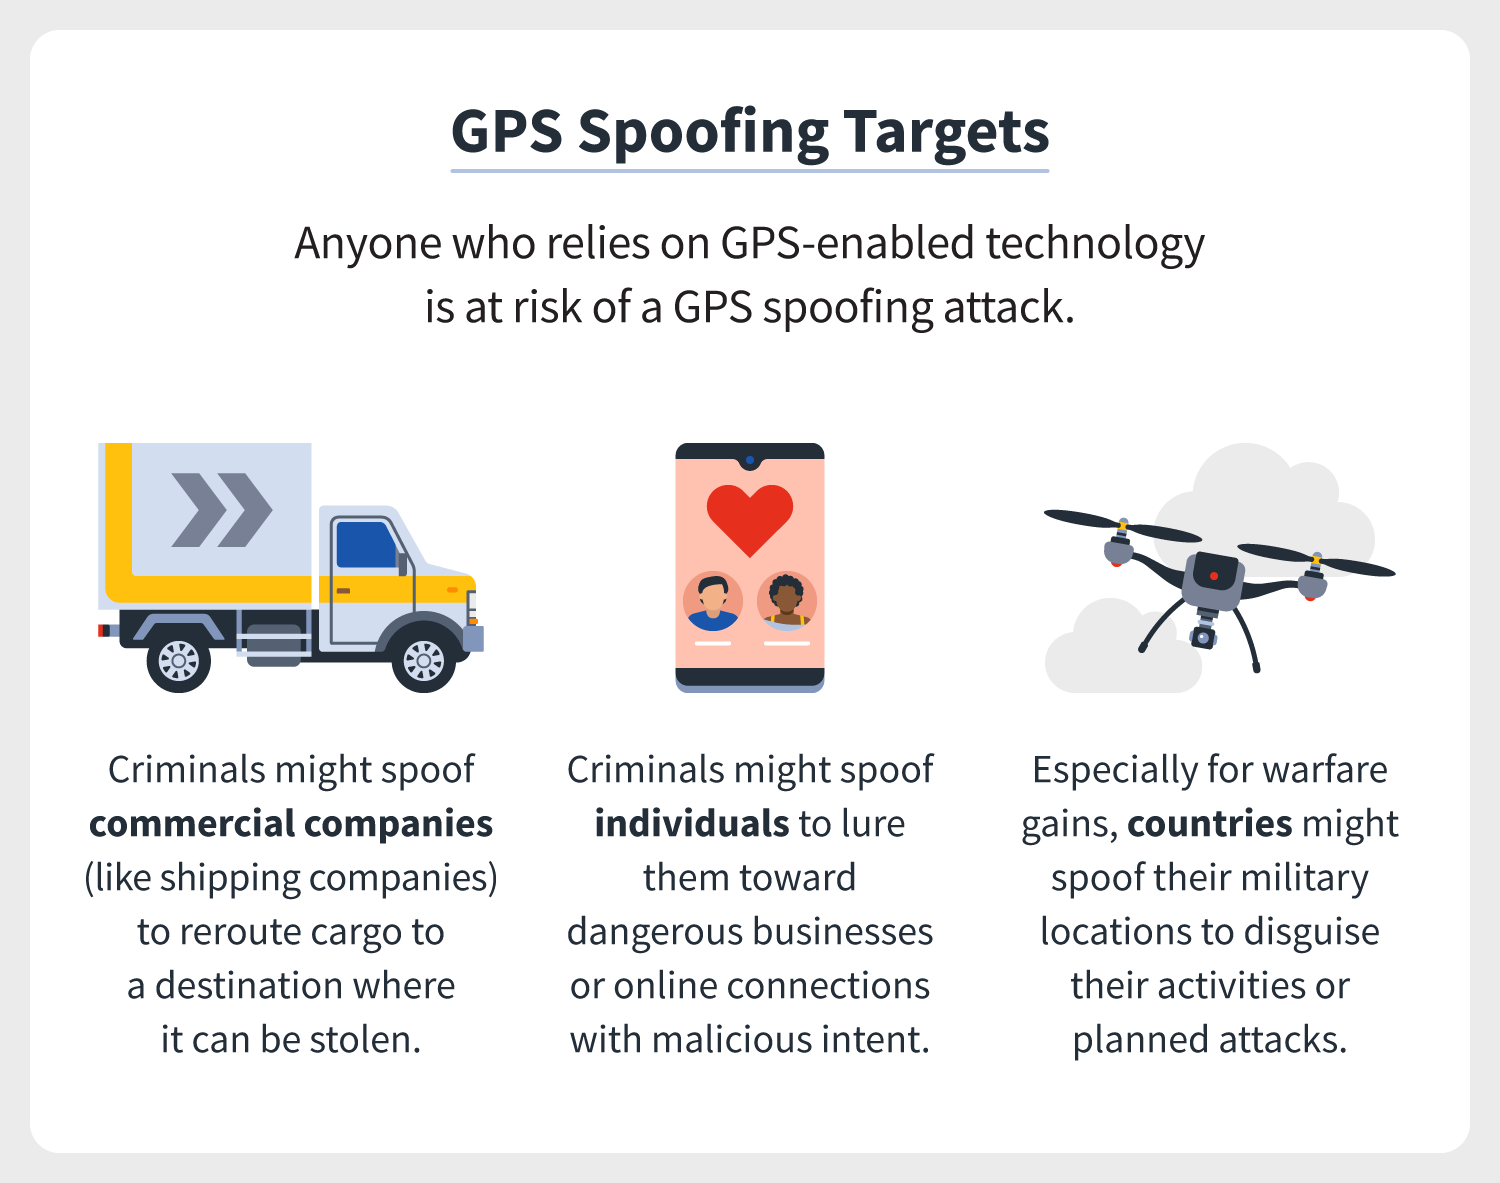 Anyone who relies on GPS-enabled technology is at risk of a GPS spoofing attack. This can include commercial companies, individuals, or countries. 